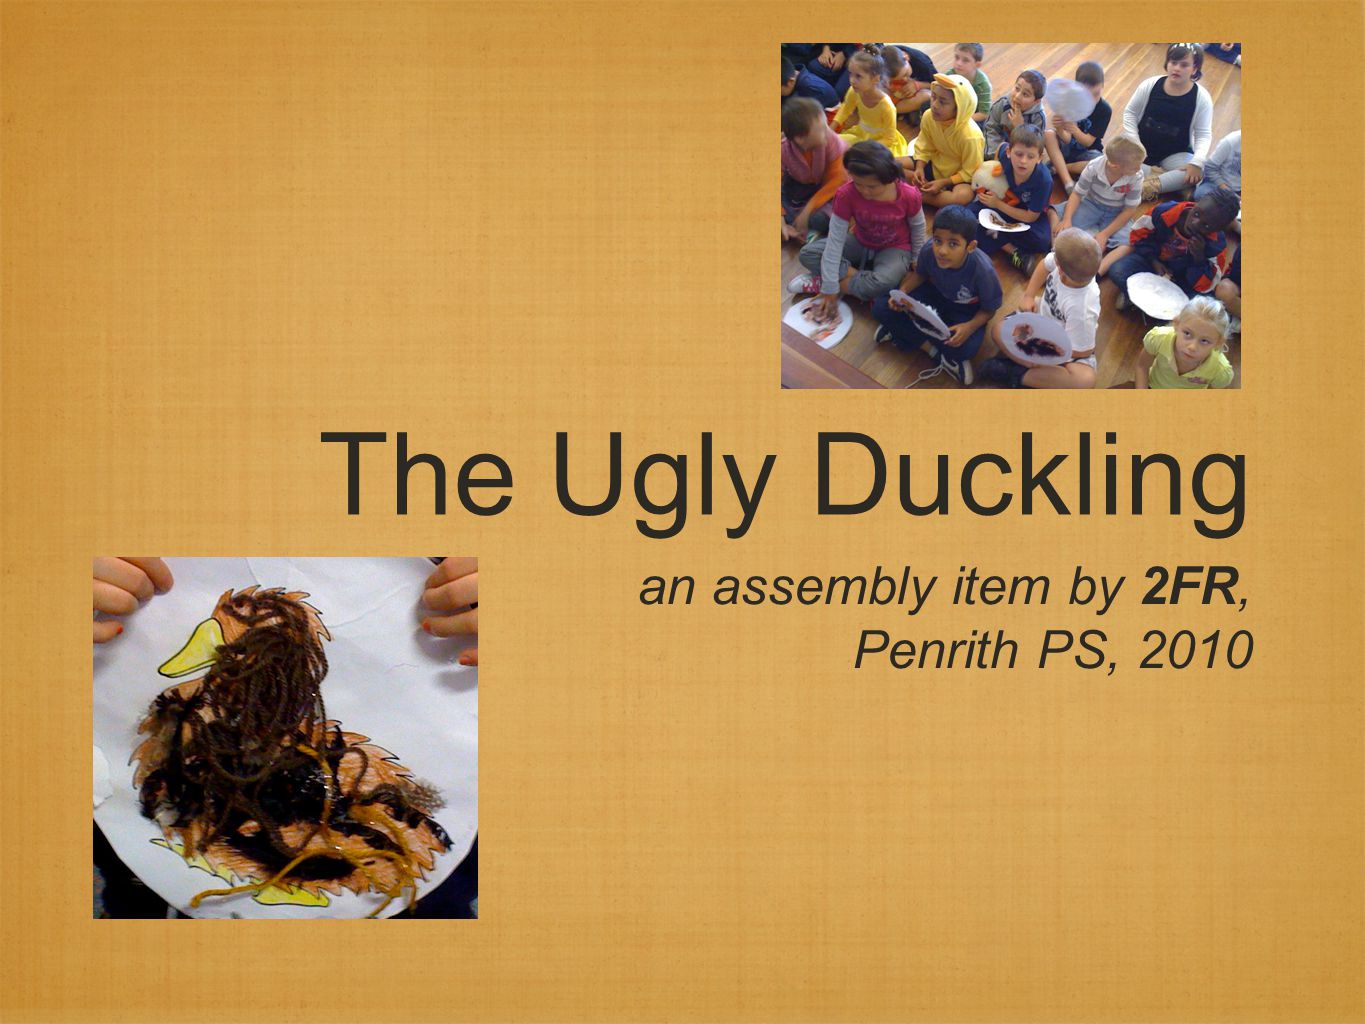 The Ugly Duckling an assembly item by 2FR, Penrith PS, 2010